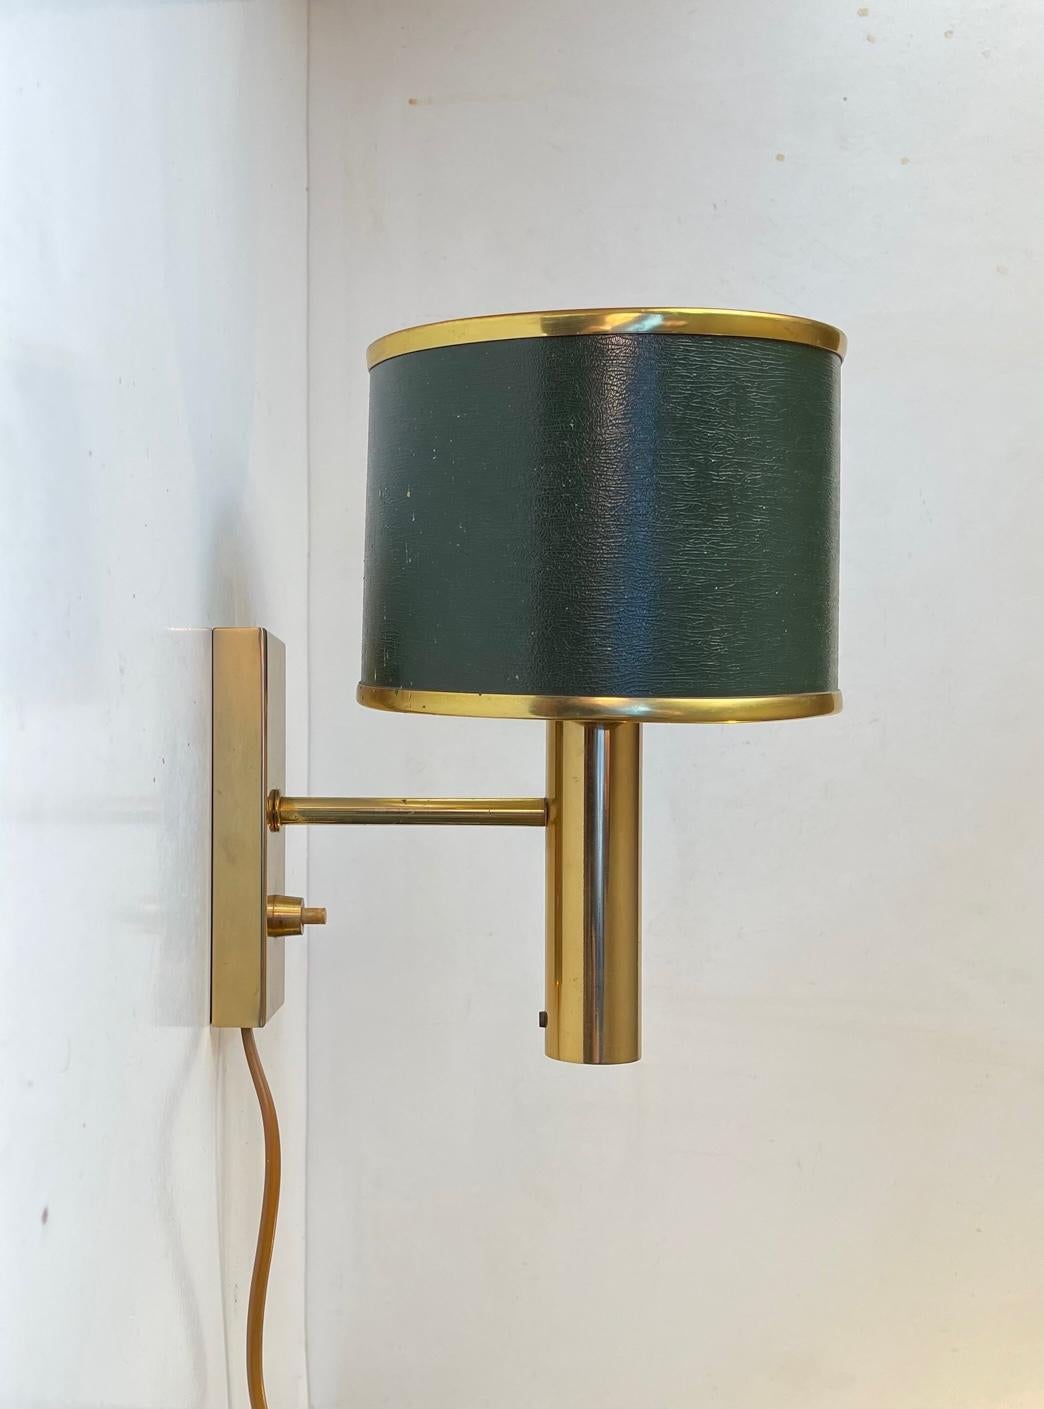 A classic Scandinavian Modern Wall light called Jason and designed by Jo Hammerborg and manufactured by Fog & Mørup in Denmark during the 1970s. It features hardware in solid polished brass and its original green shade with brass accents.